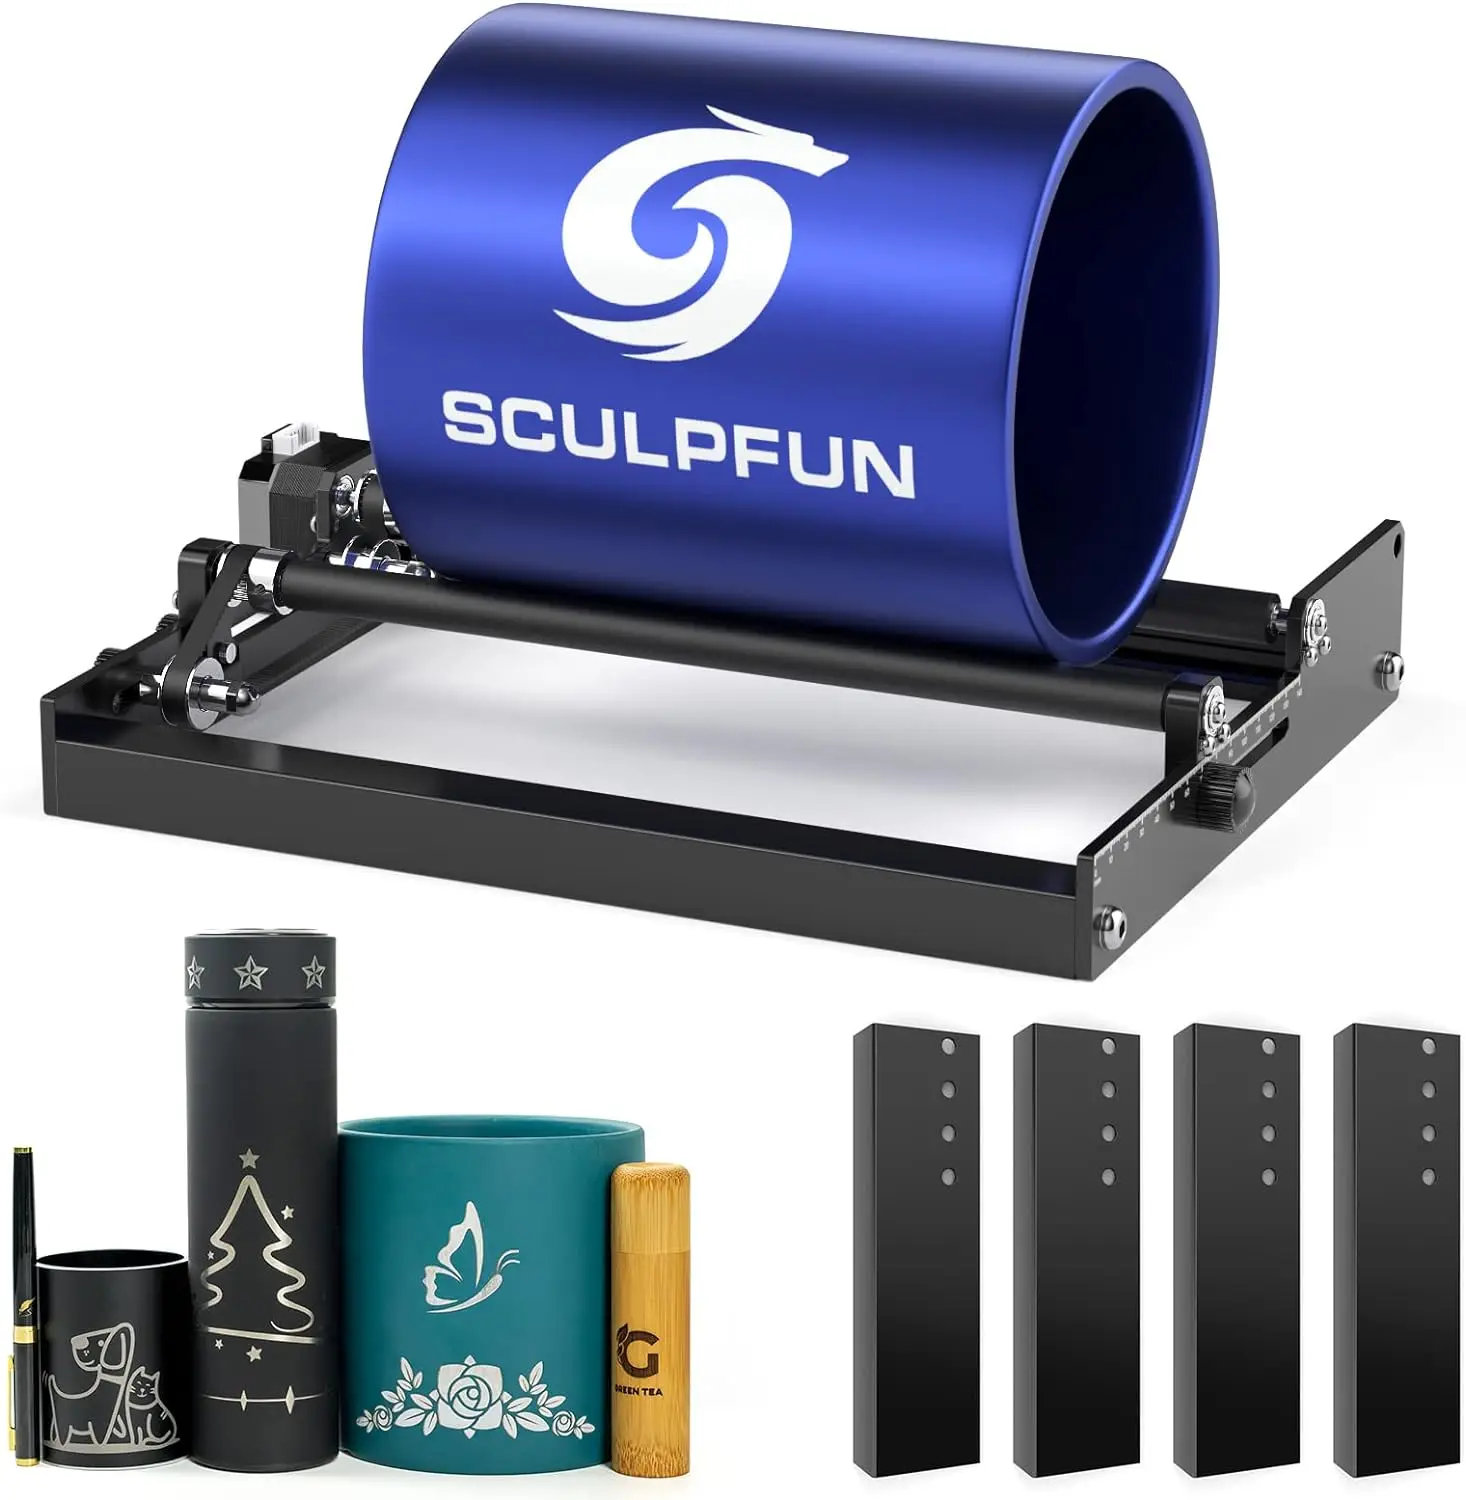 

SCULPFUN S9/S10 Laser Rotary Roller Engraver Y-axis Rotary Roller for 6-150mm Engraving Cylindrical Objects 360° Rotating